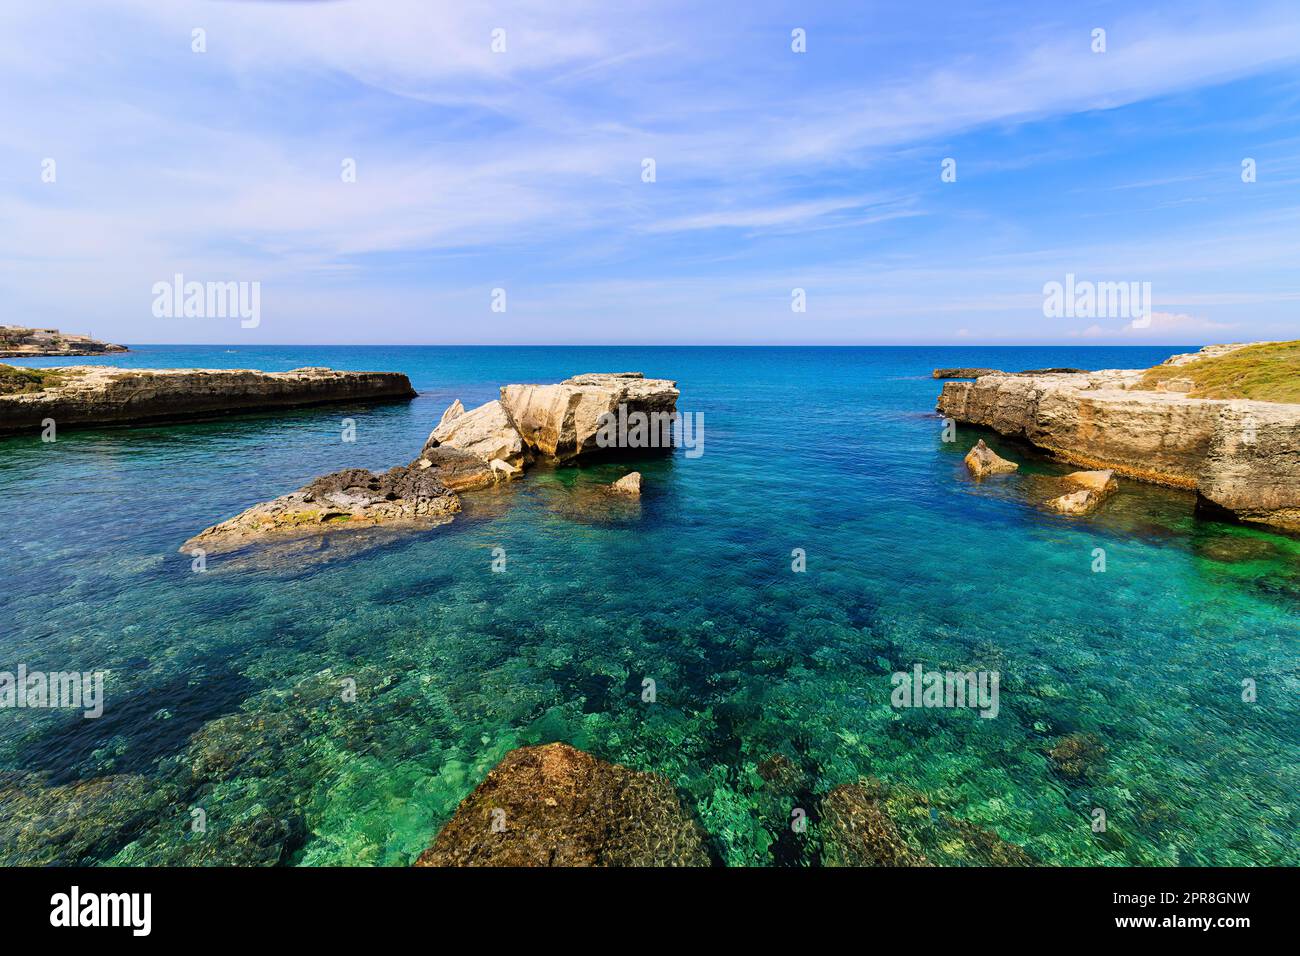 Old Roca, a coastal town in Salento and one of the marinas of Melendugno, in the province of Lecce. Stock Photo